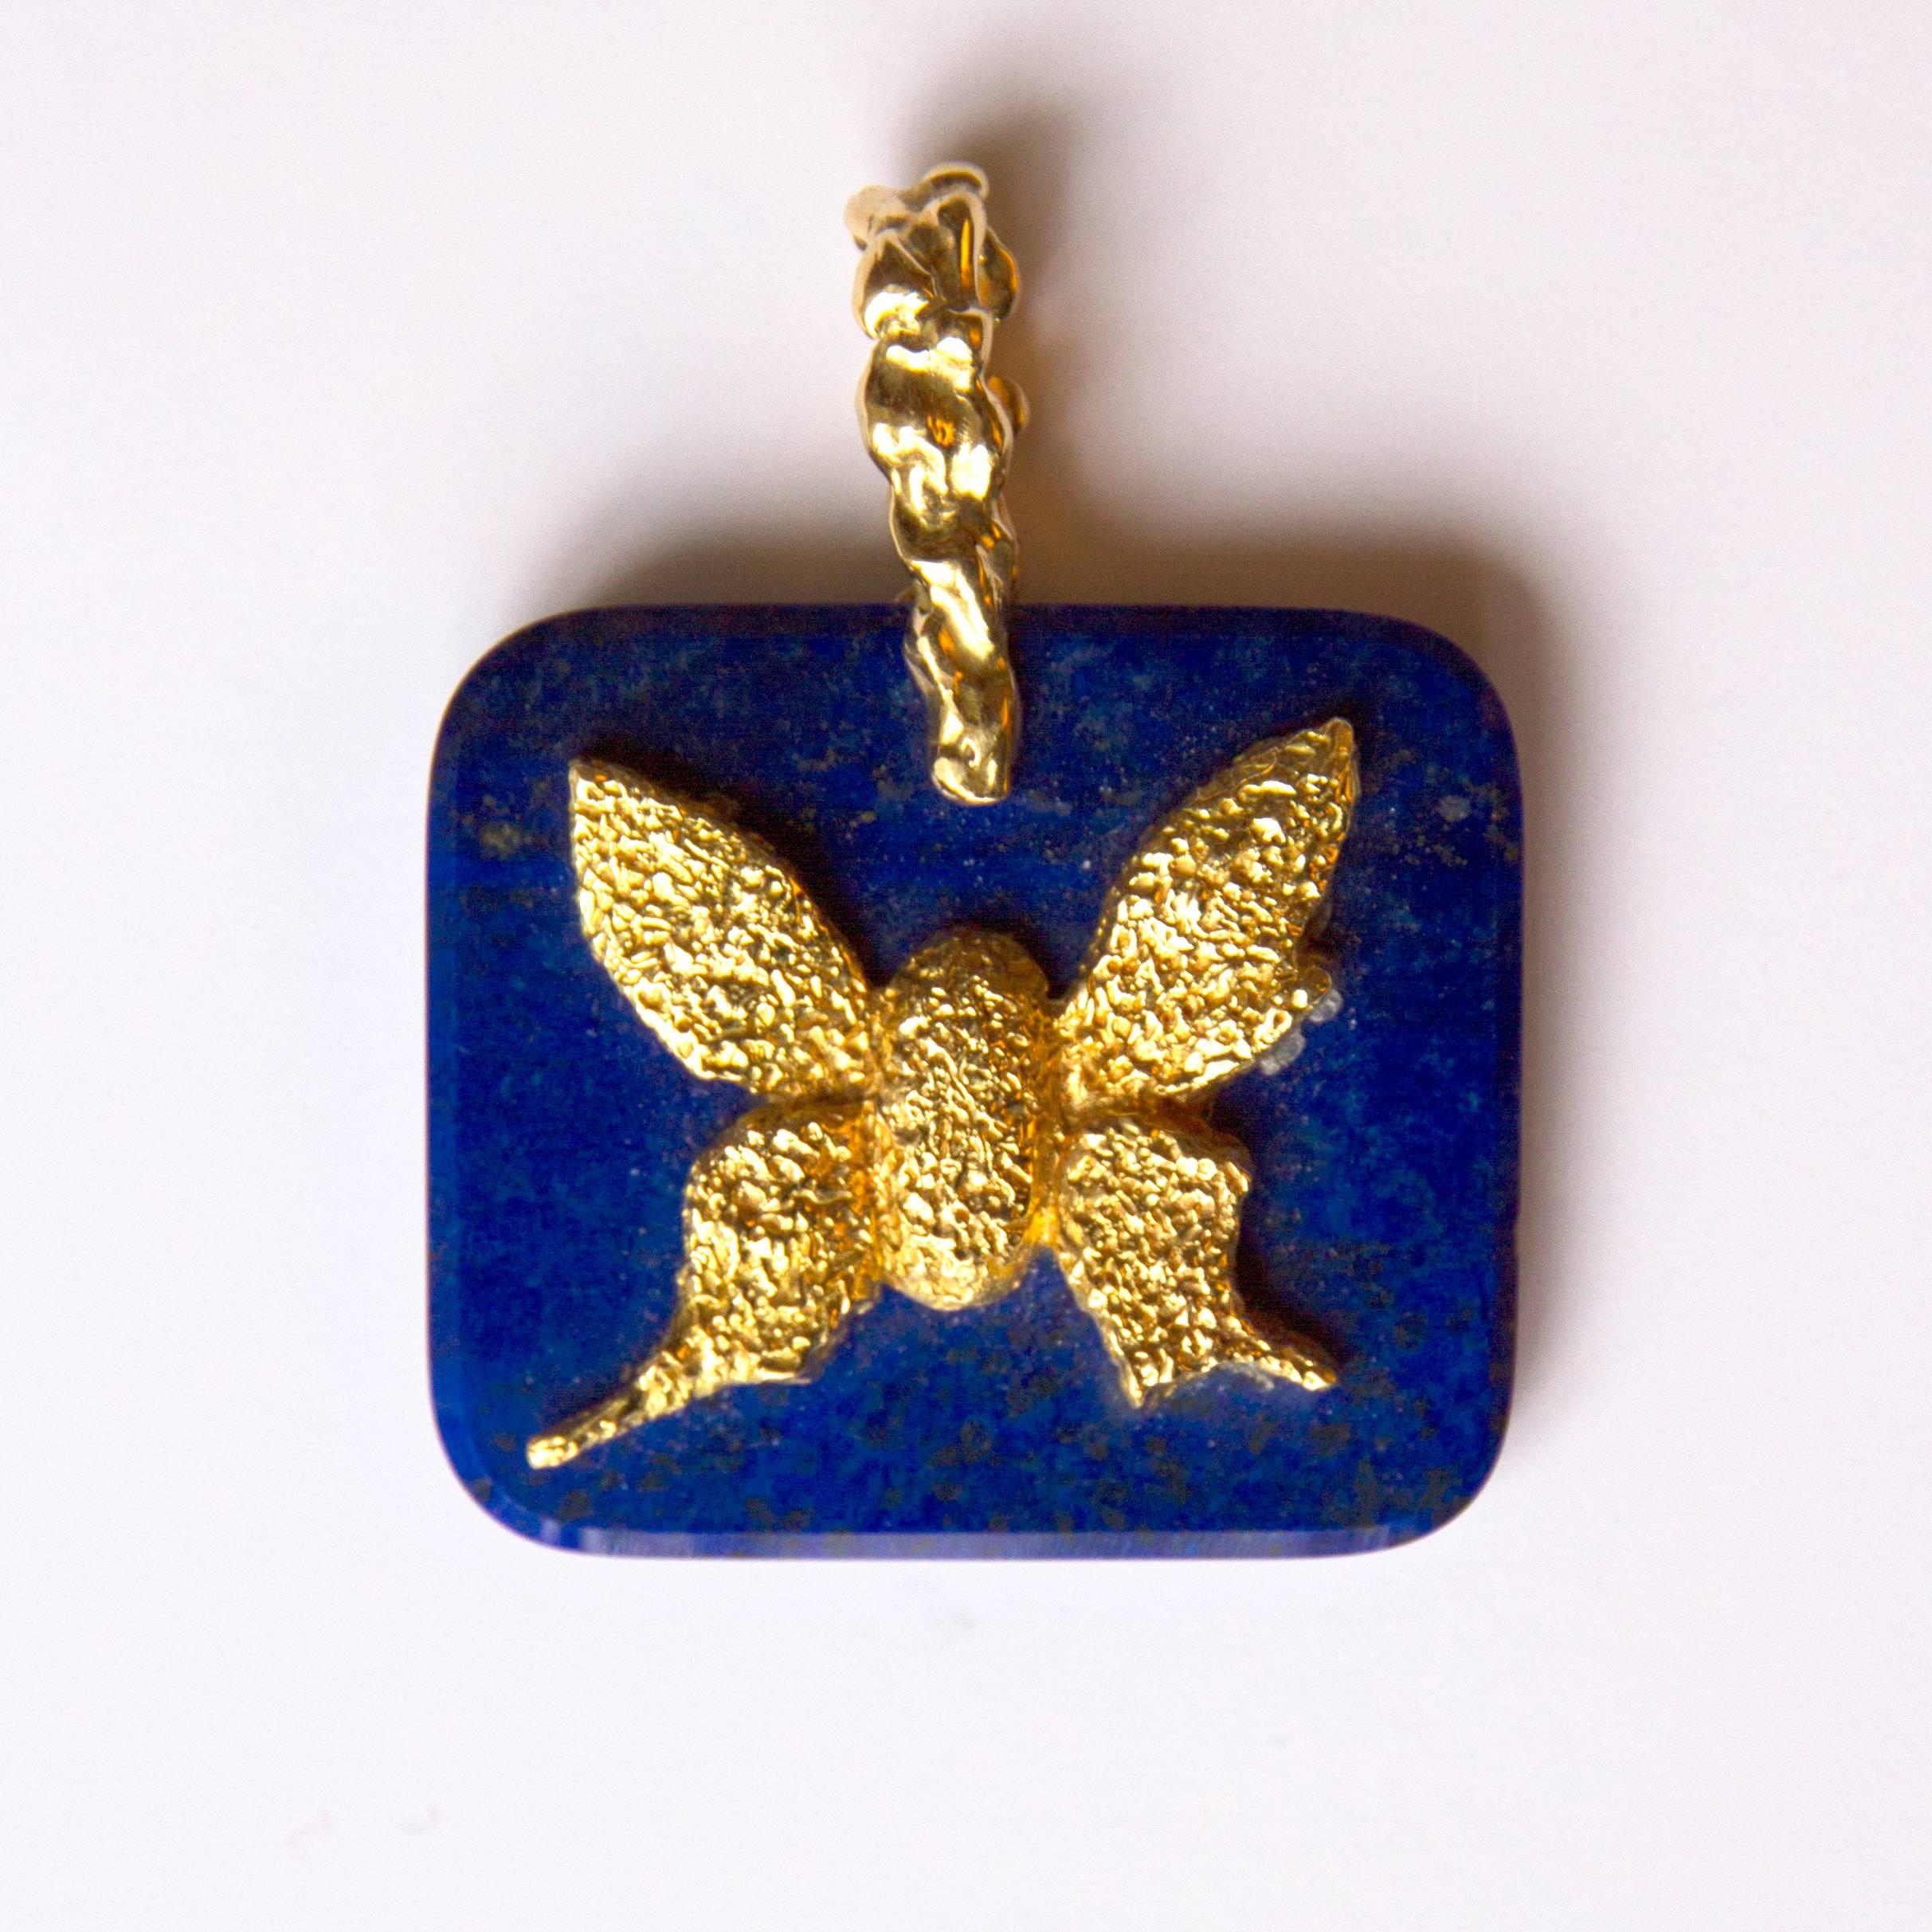 Express Shipping insured during the Lockdown

Beautiful 18K Gold and Lapis Lazuli pendant by Georges Braque (1882-1963), inventor of cubism. 
The piece is called 